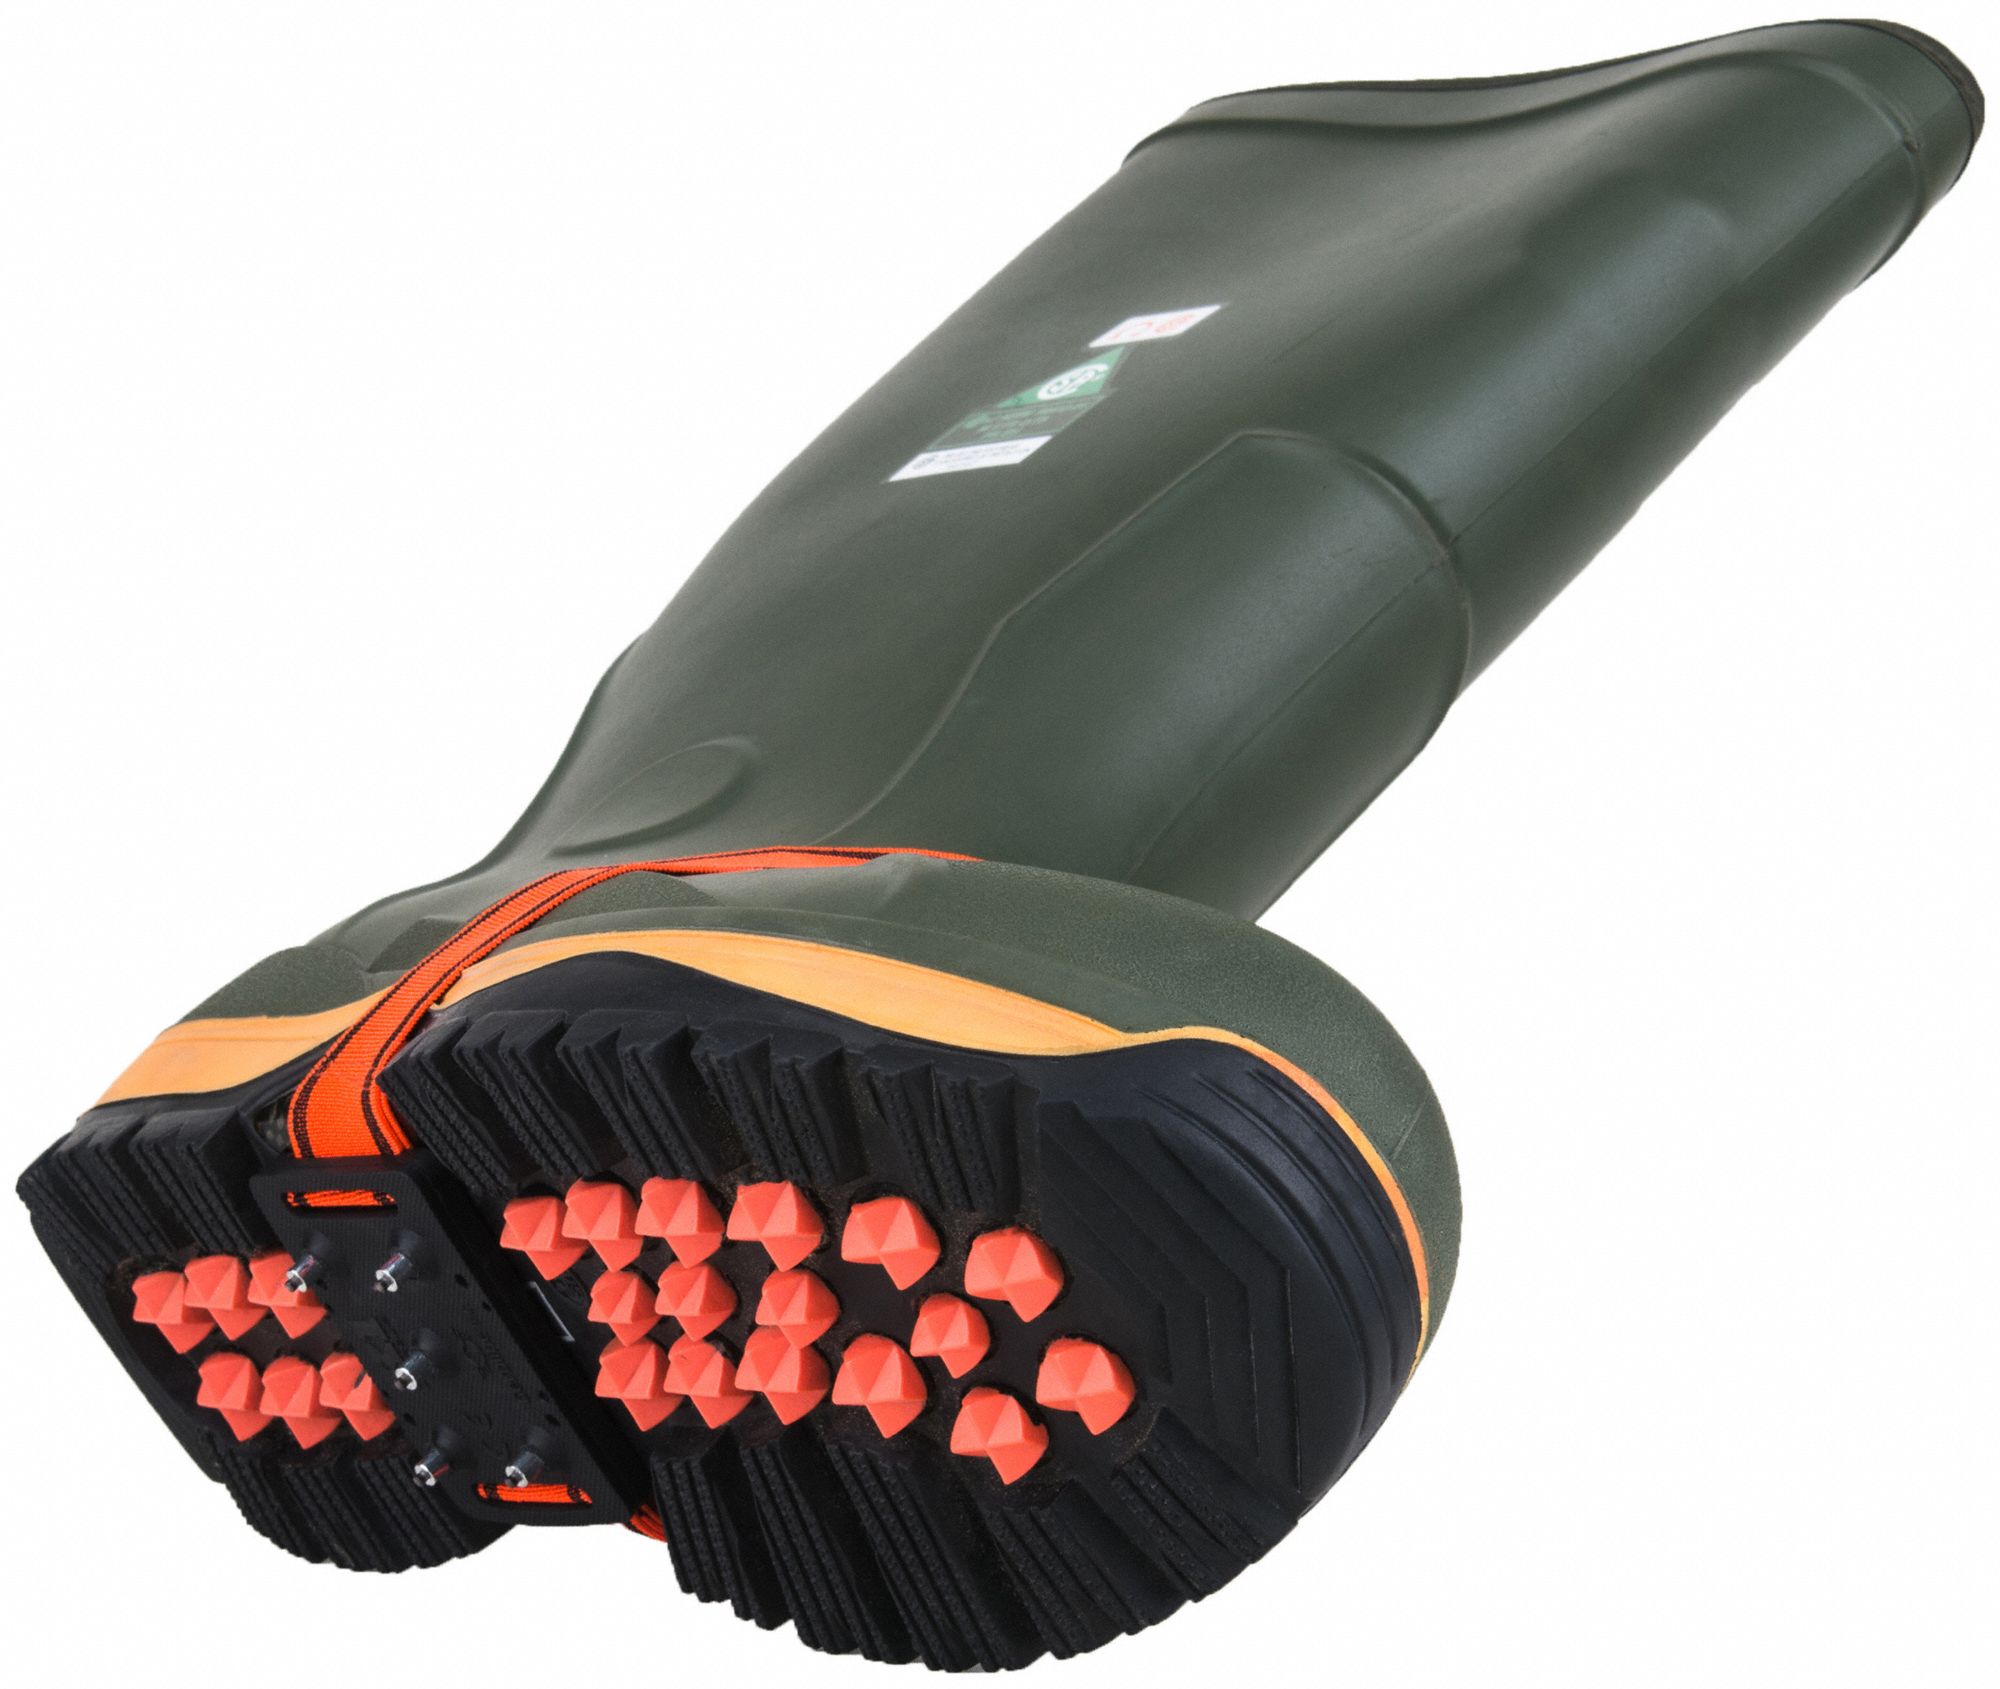 Traction Device: Mid-Sole Footwear Coverage, Rubber, Stud, Strap-On Traction Attachment, 1 PR